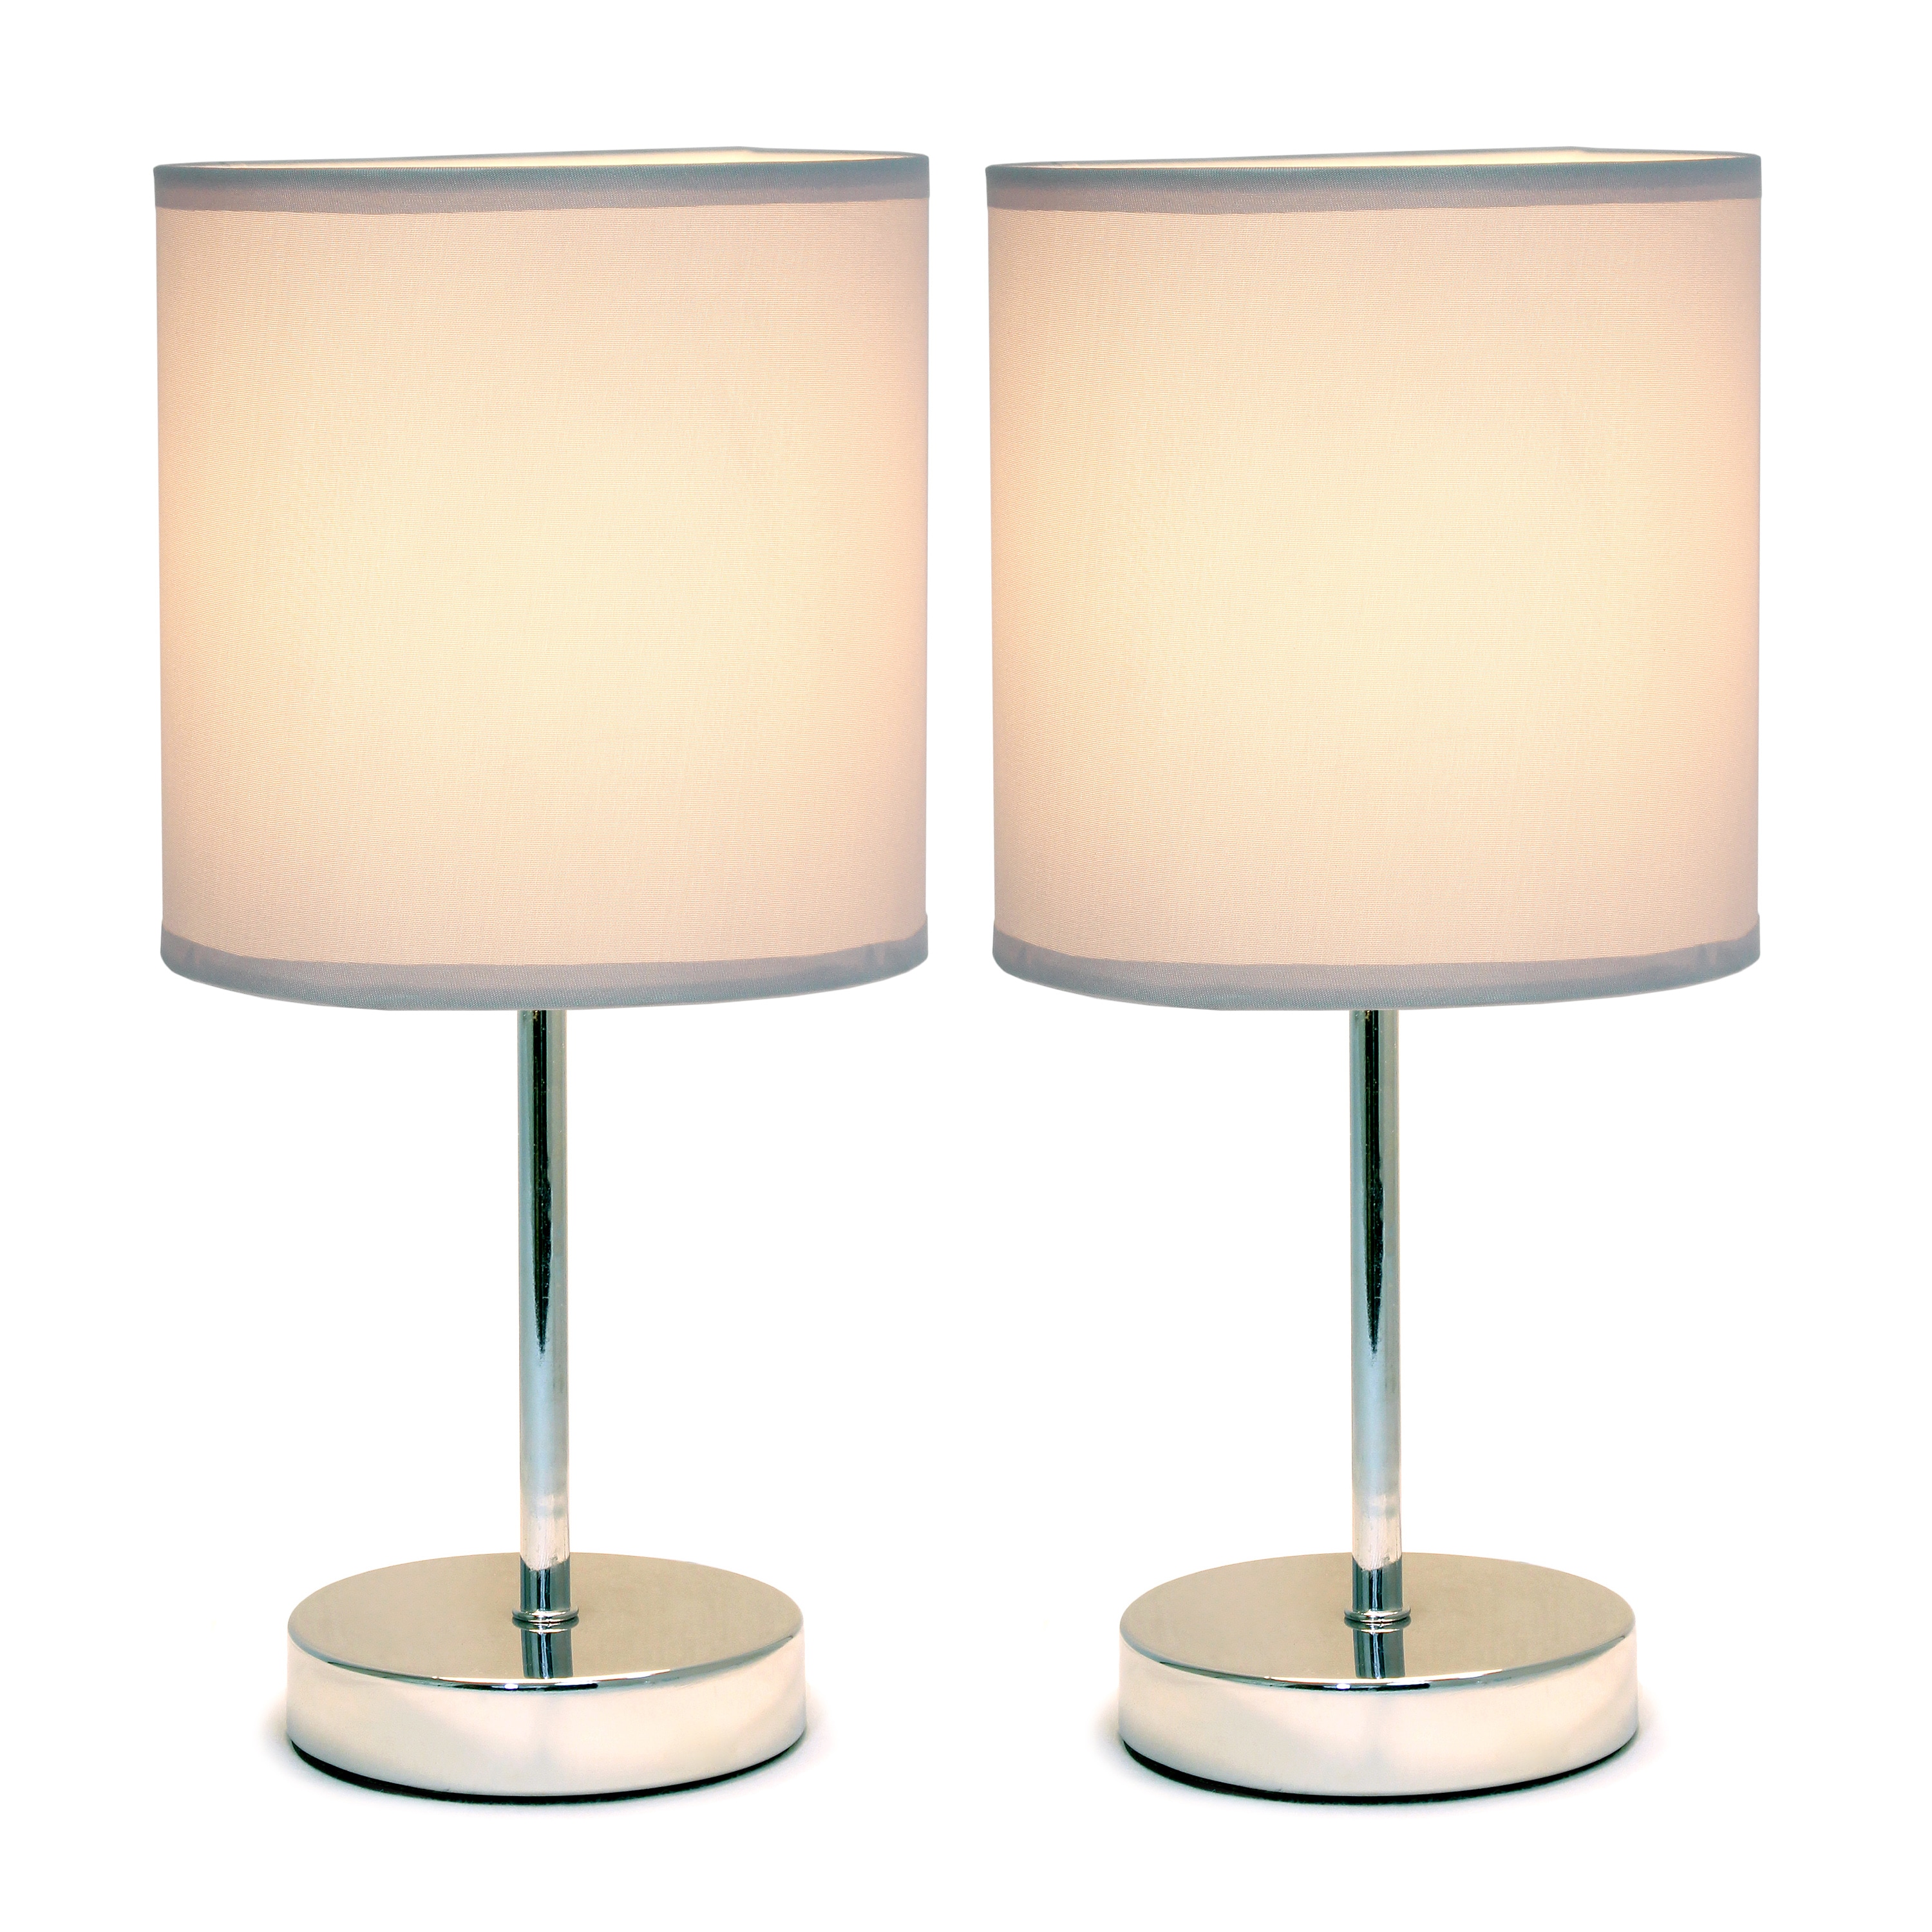 Simple Designs Simple Designs Chrome Mini Basic Table Lamp with Fabric  Shade 2 Pack Set, Slate Gray in the Lamp Sets department at Lowes.com